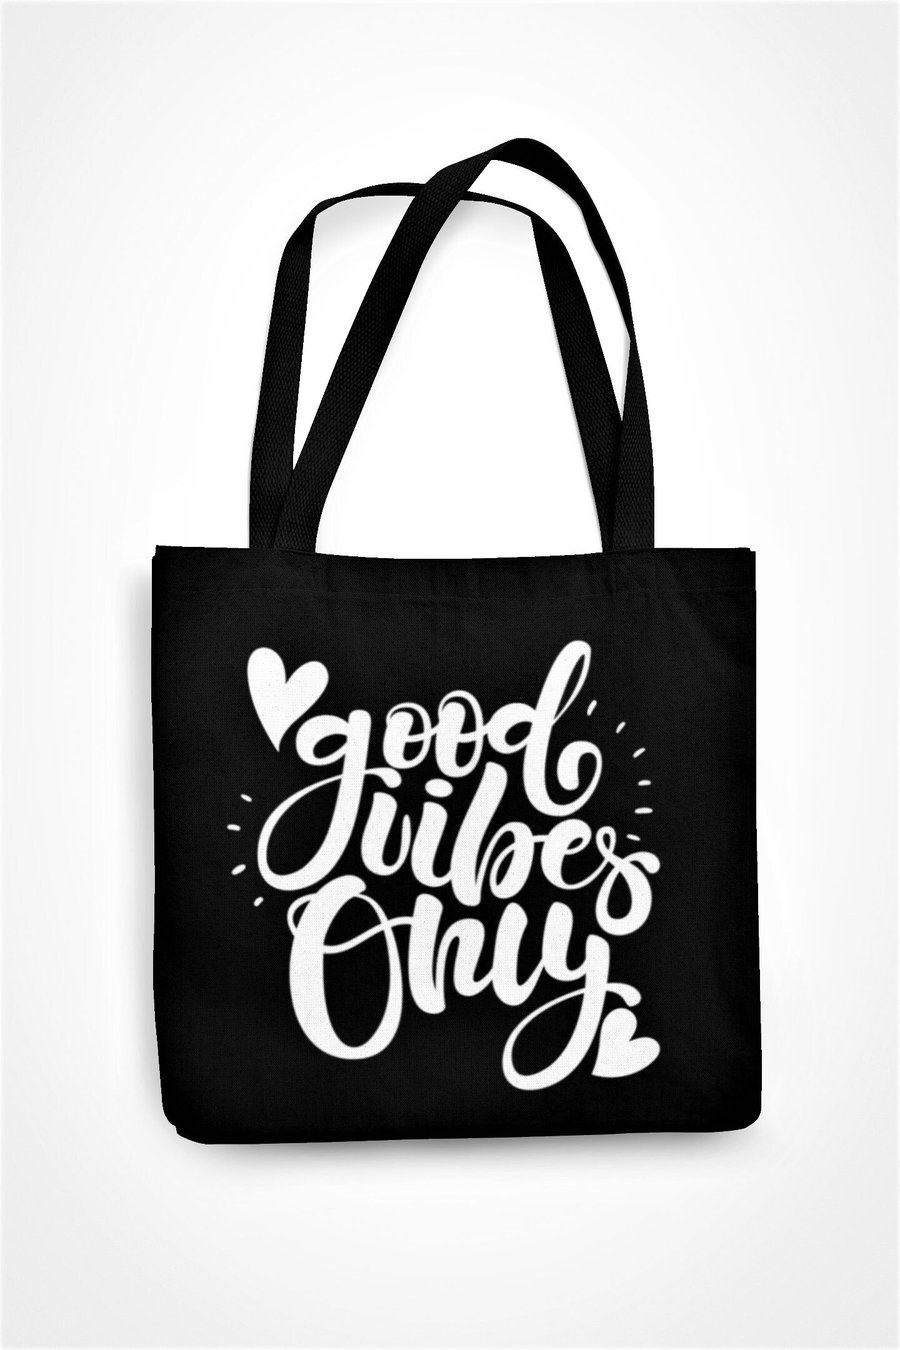 Good Vibes Only Tote Bag Positive Motivational Shopping Bag Inspirational Tote 